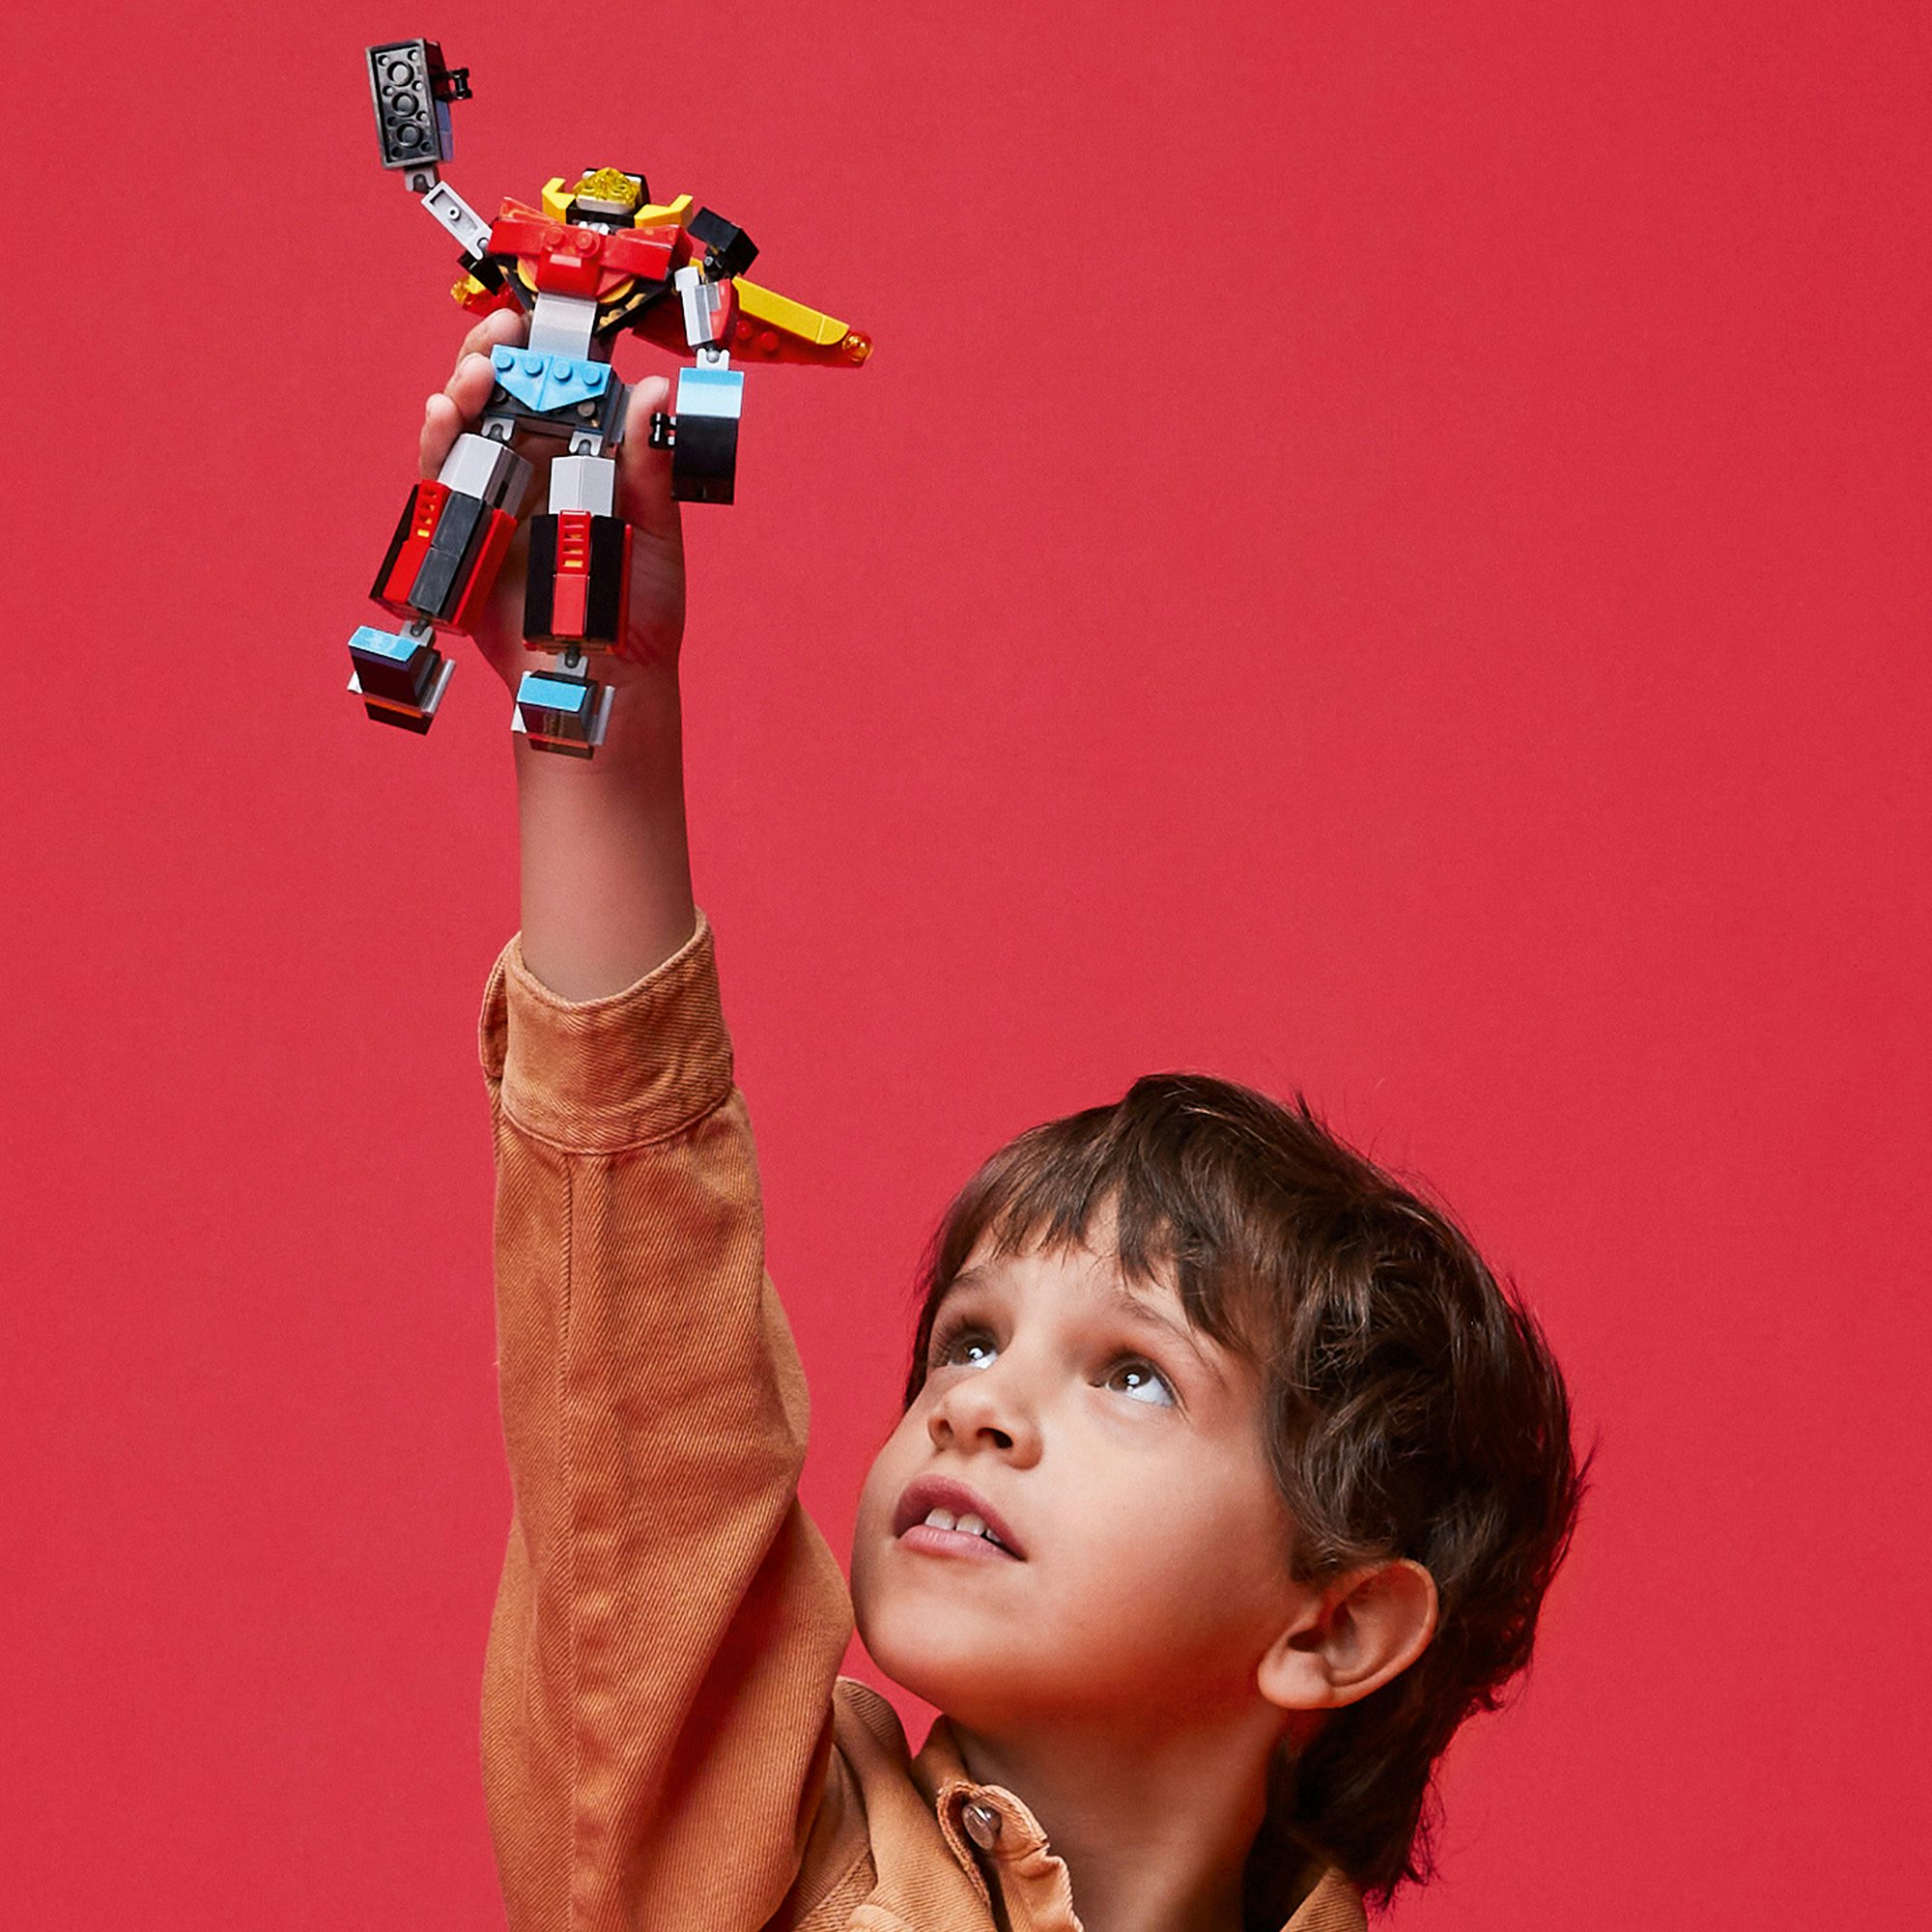 Photograph of a child holding up a Lego figurine overhead